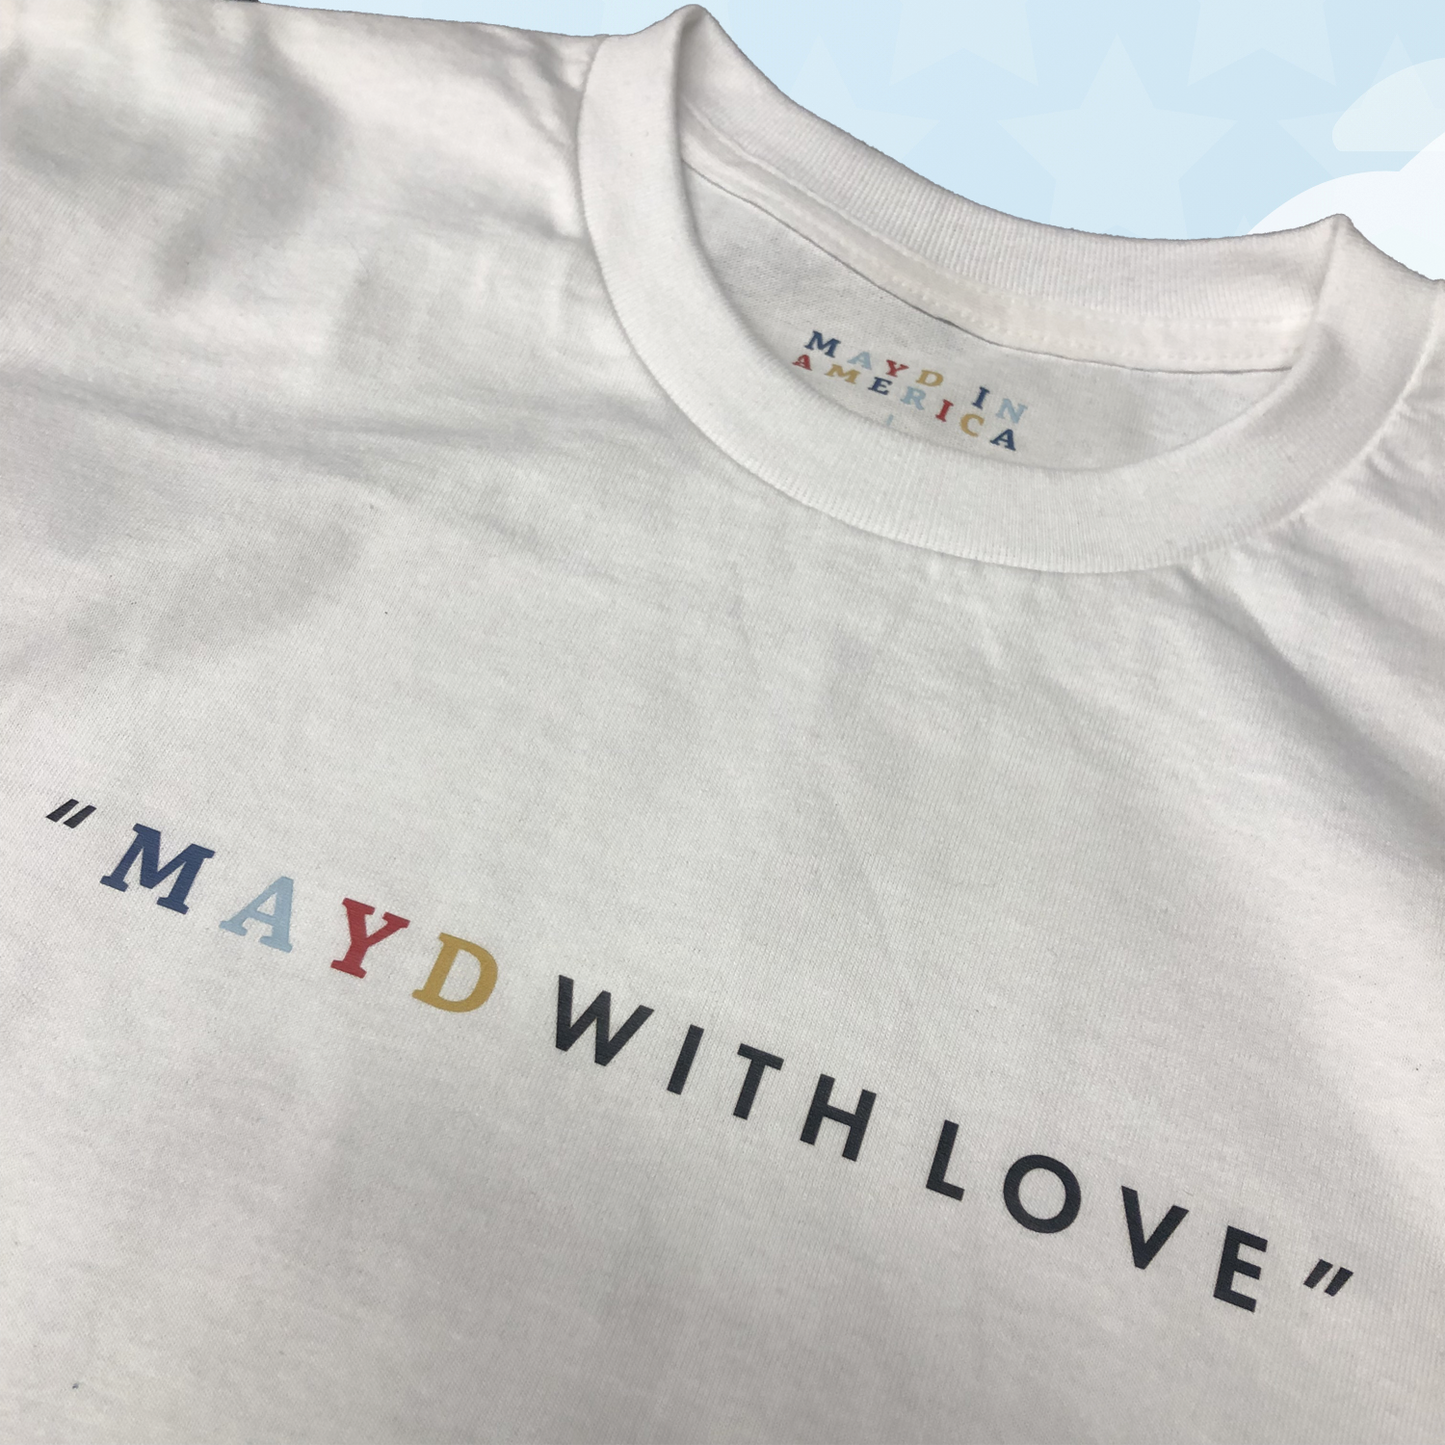 MAYD in America "Mayd with Love" T-shirt